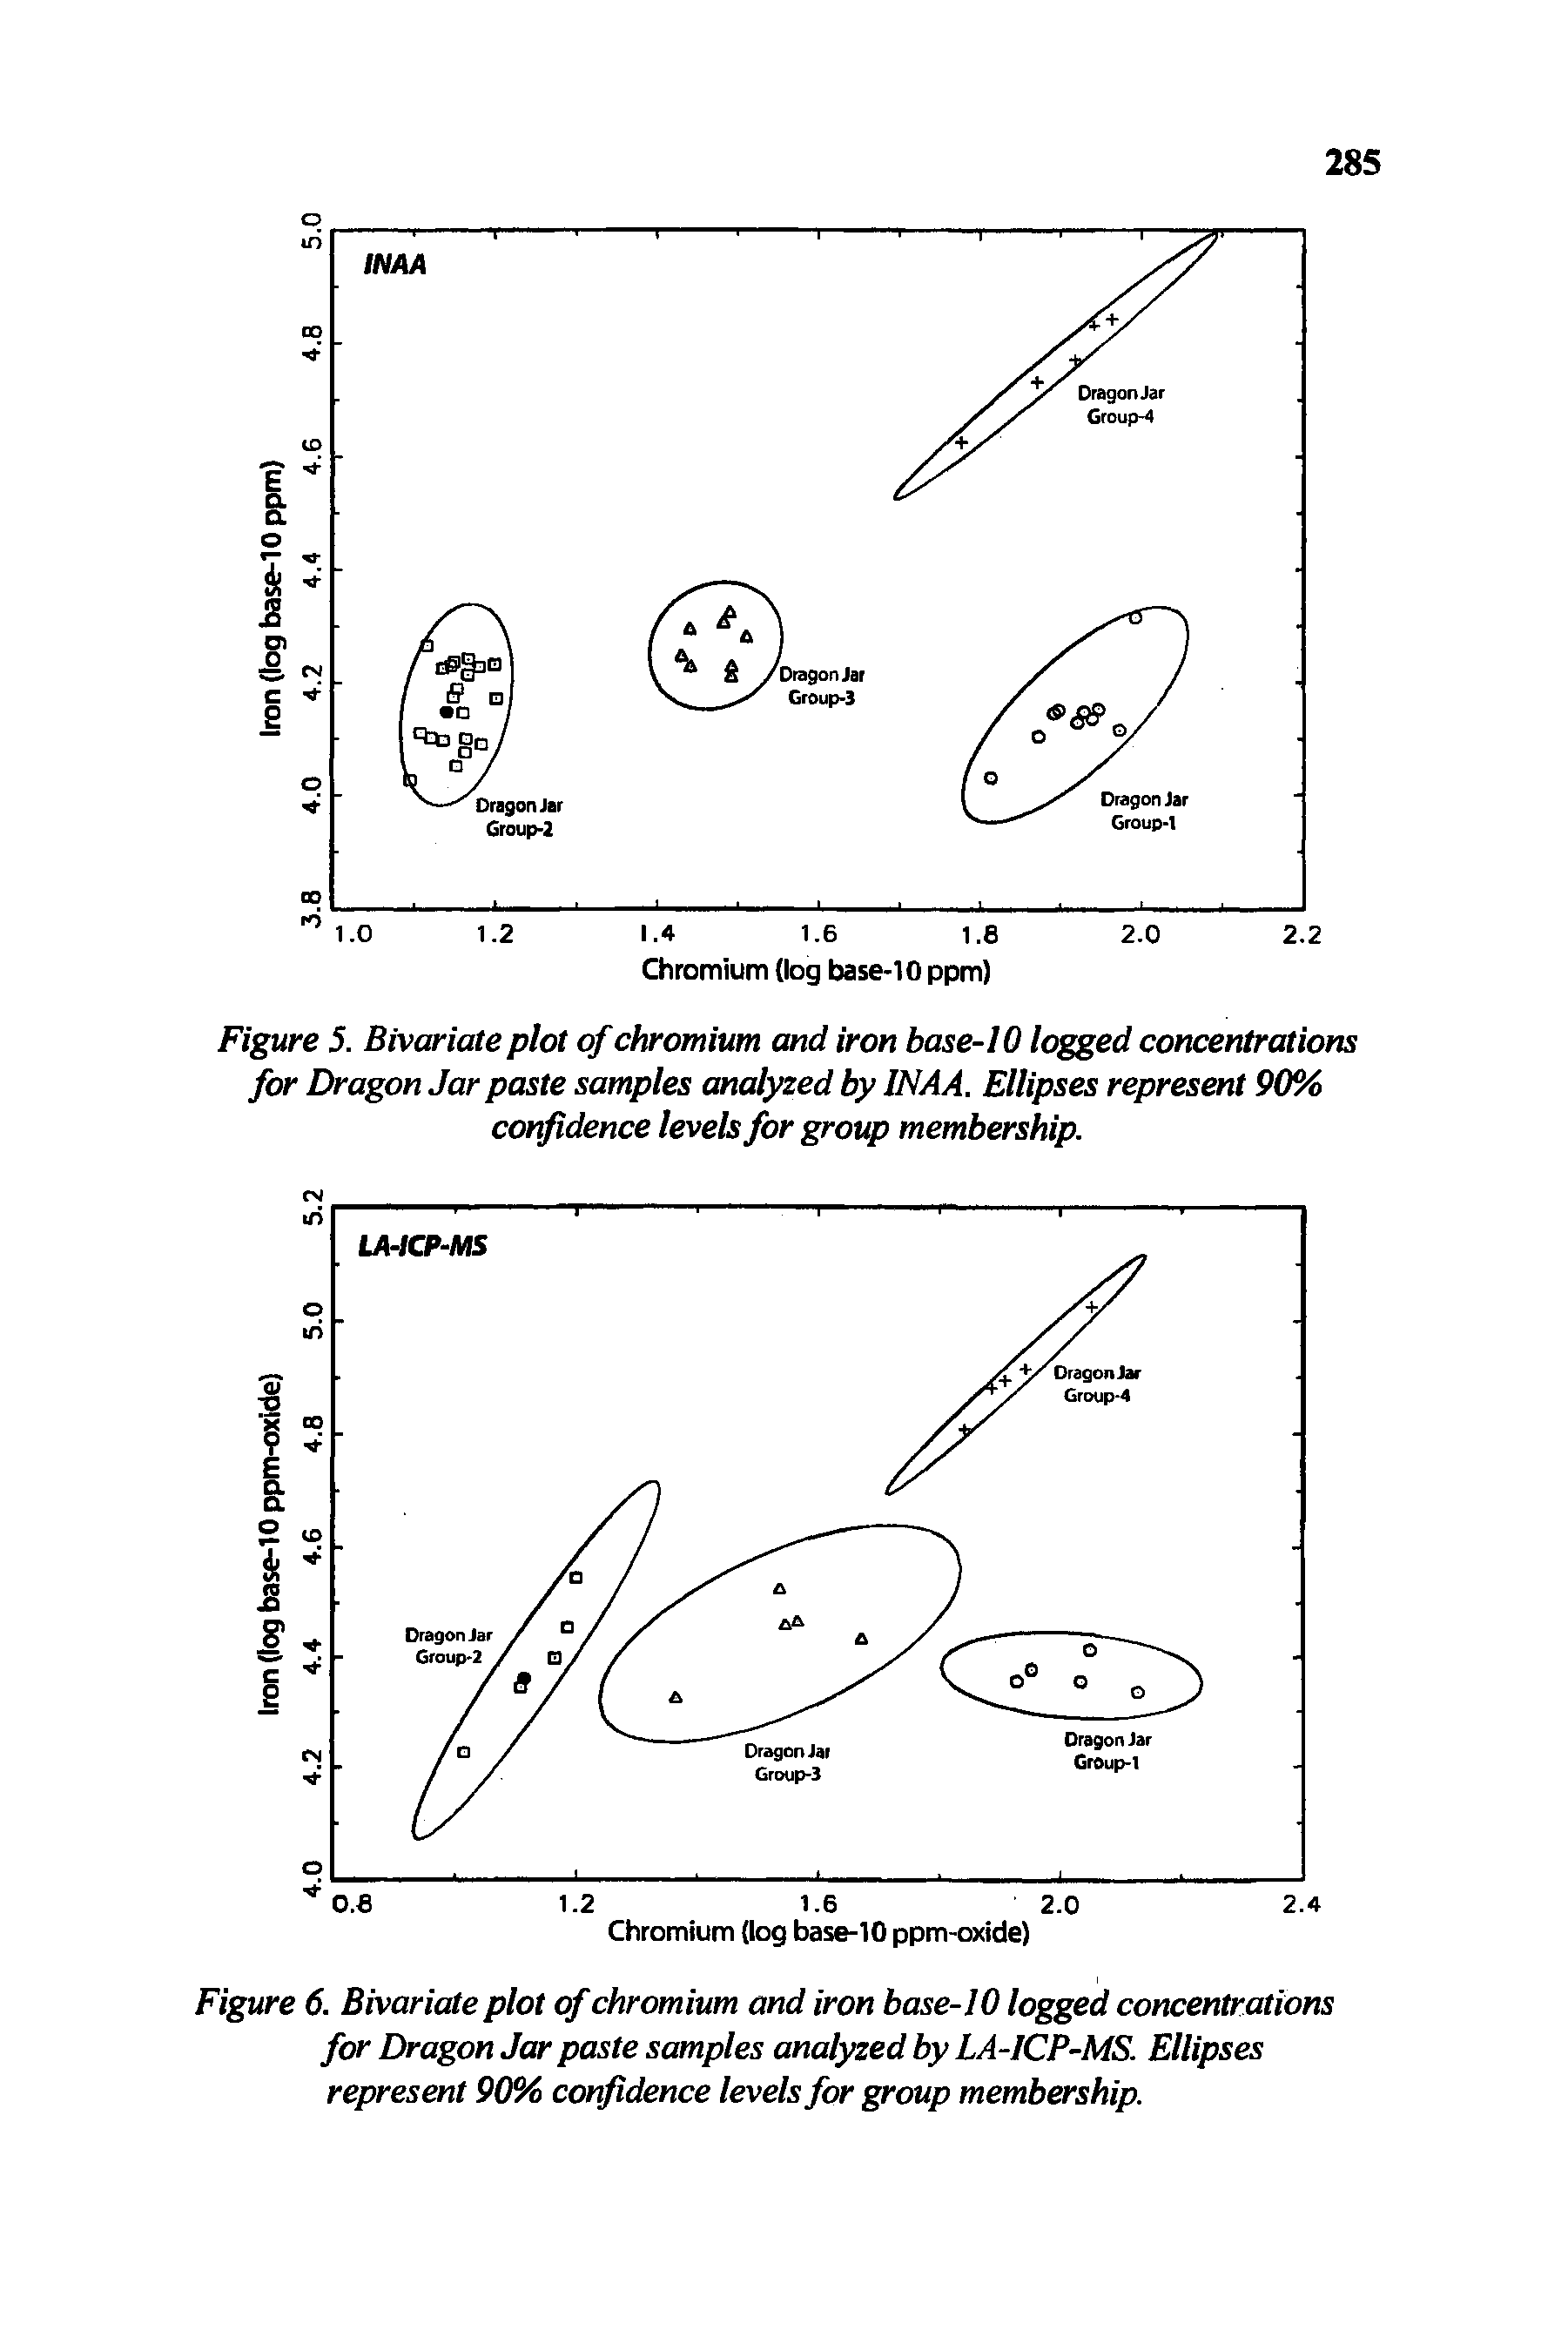 Figure 5. Bivariate plot of chromium and iron base-10 logged concentrations for Dragon Jar paste samples analyzed by INAA. Ellipses represent 90% confidence levels for group membership.